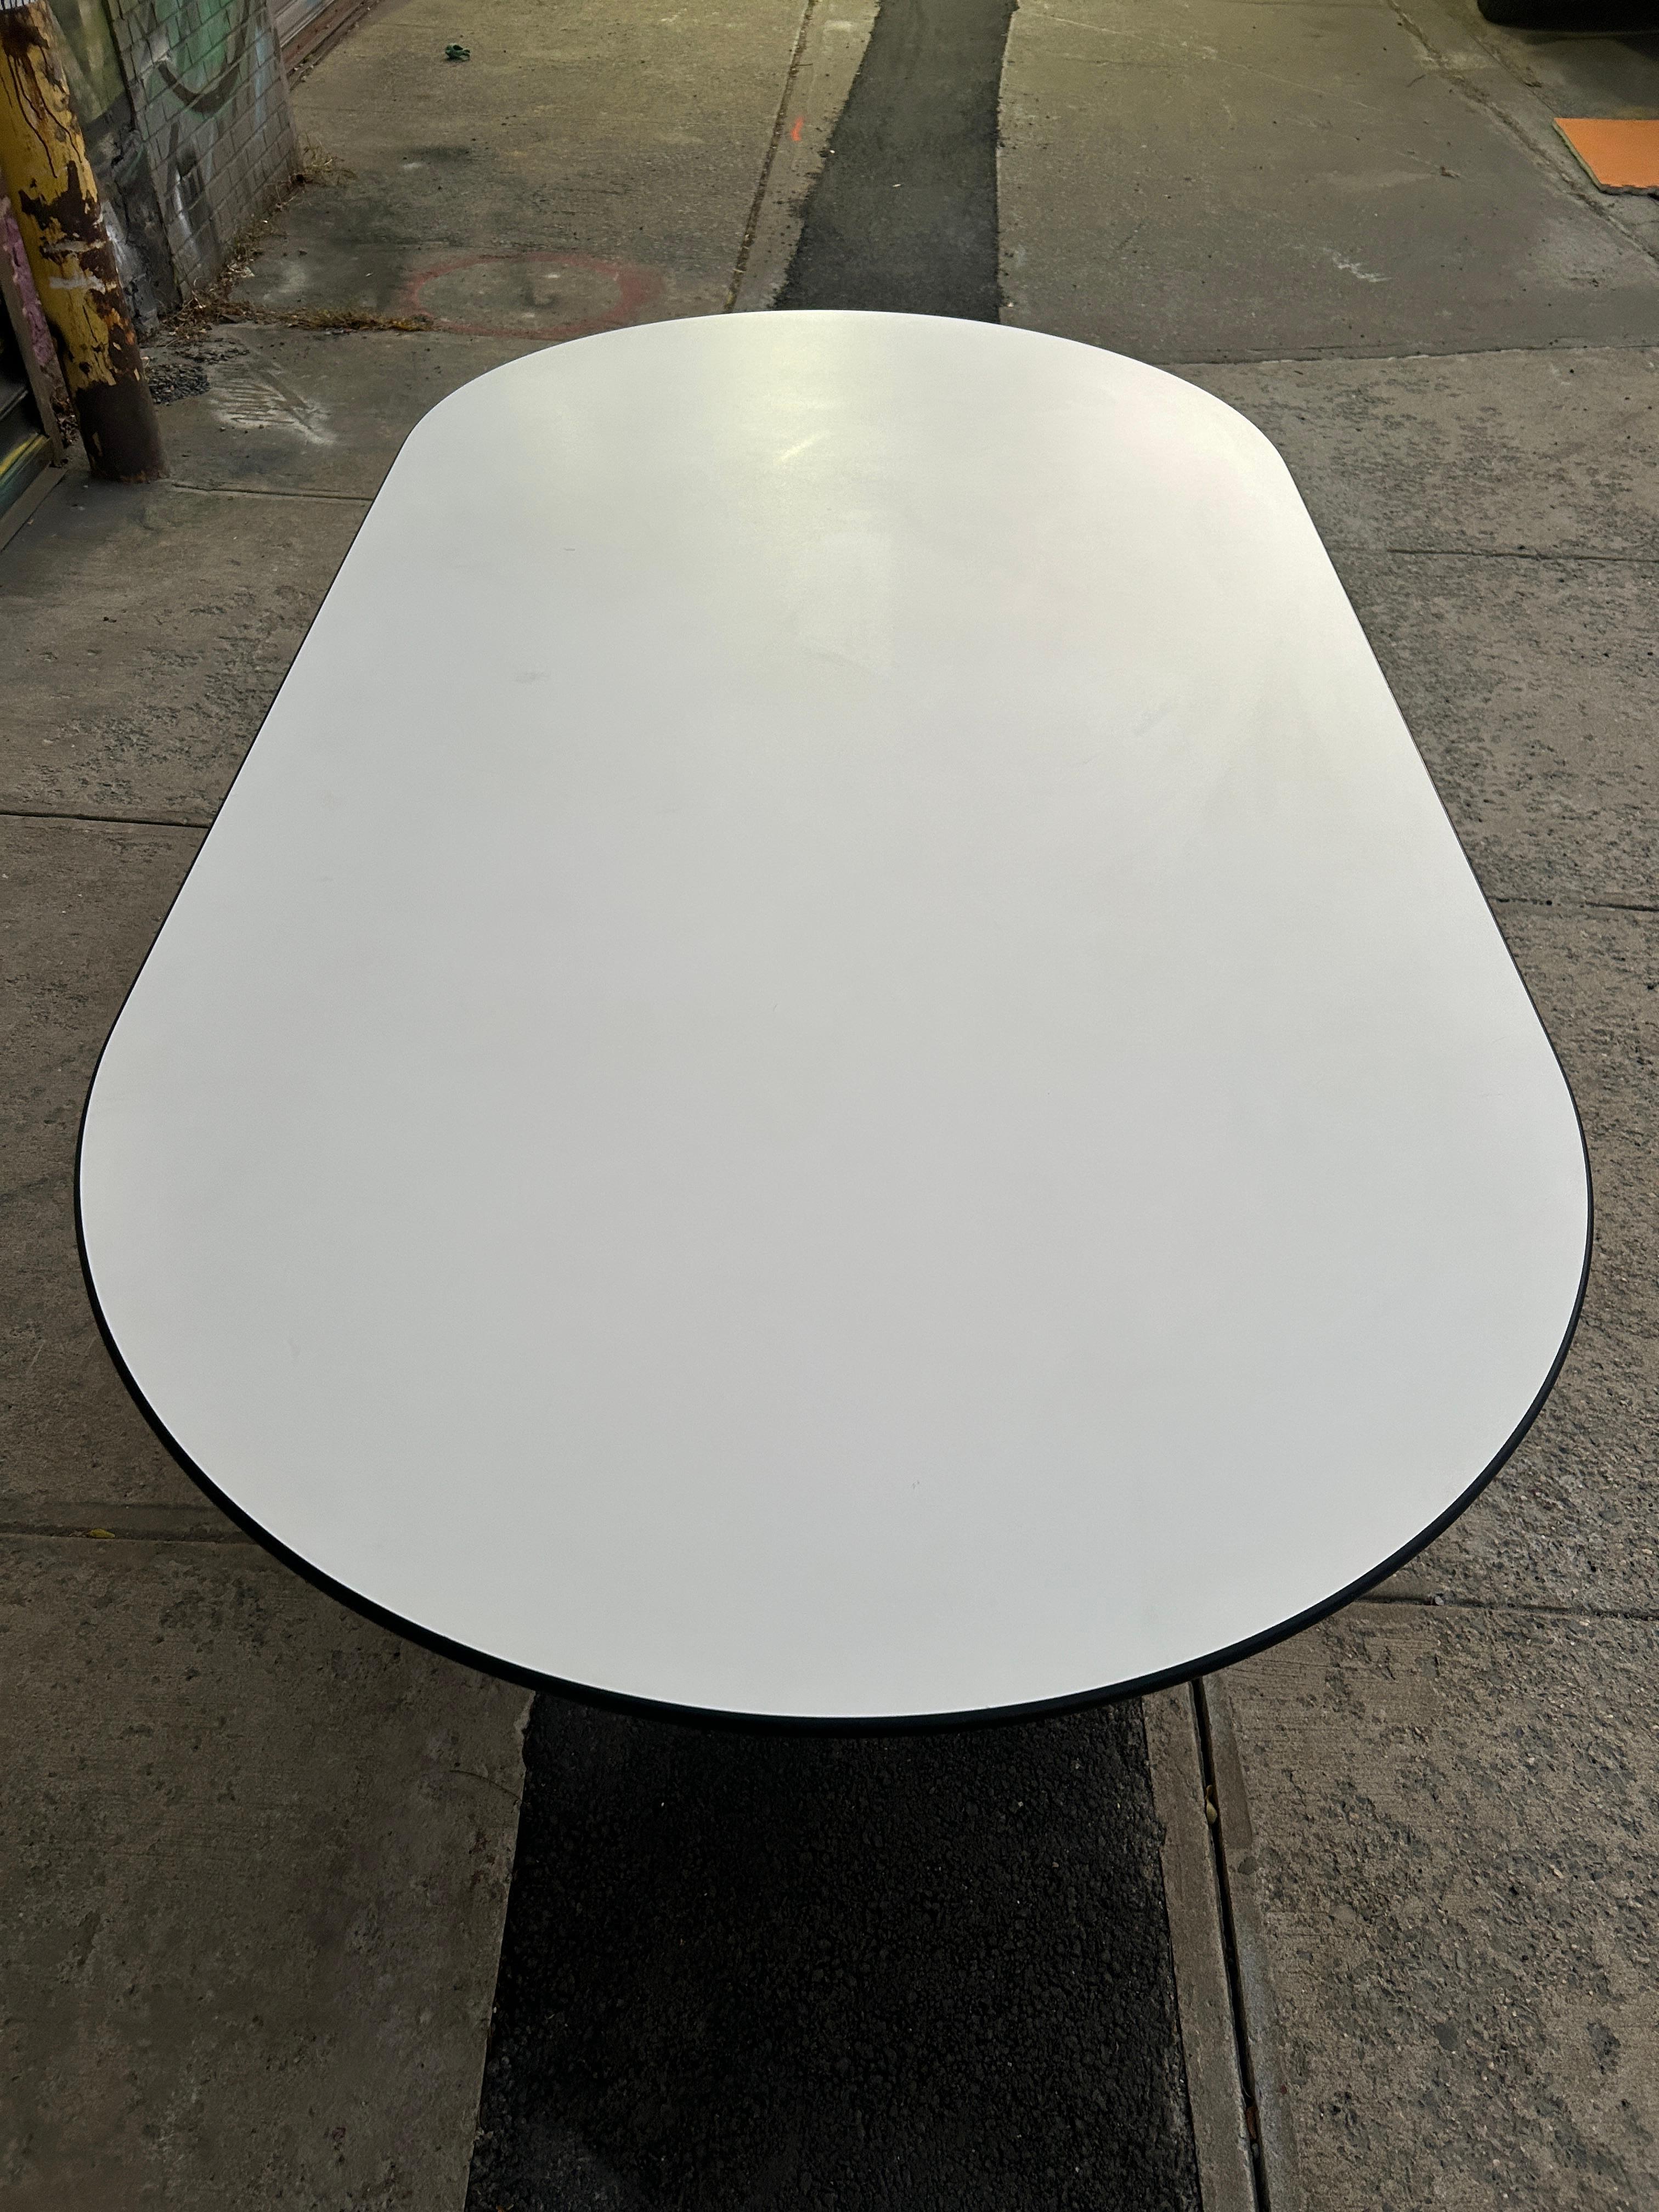 Late 20th Century Post modern Knoll white laminate racetrack dining table by joe d'urso  For Sale